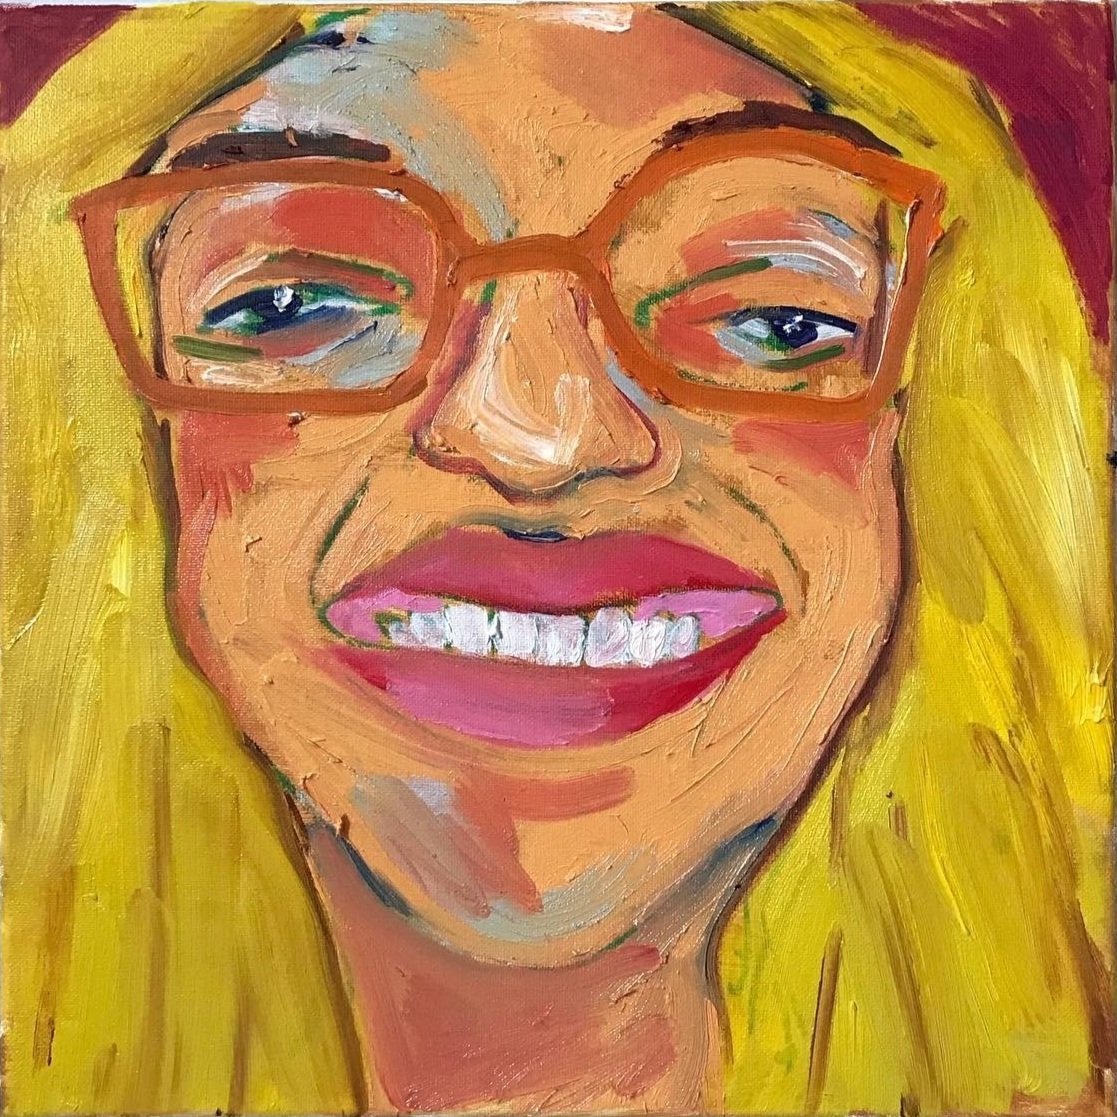  Untitled (Cheese)  Oil Paint on Canvas  2021  14 inches x 14 inches 